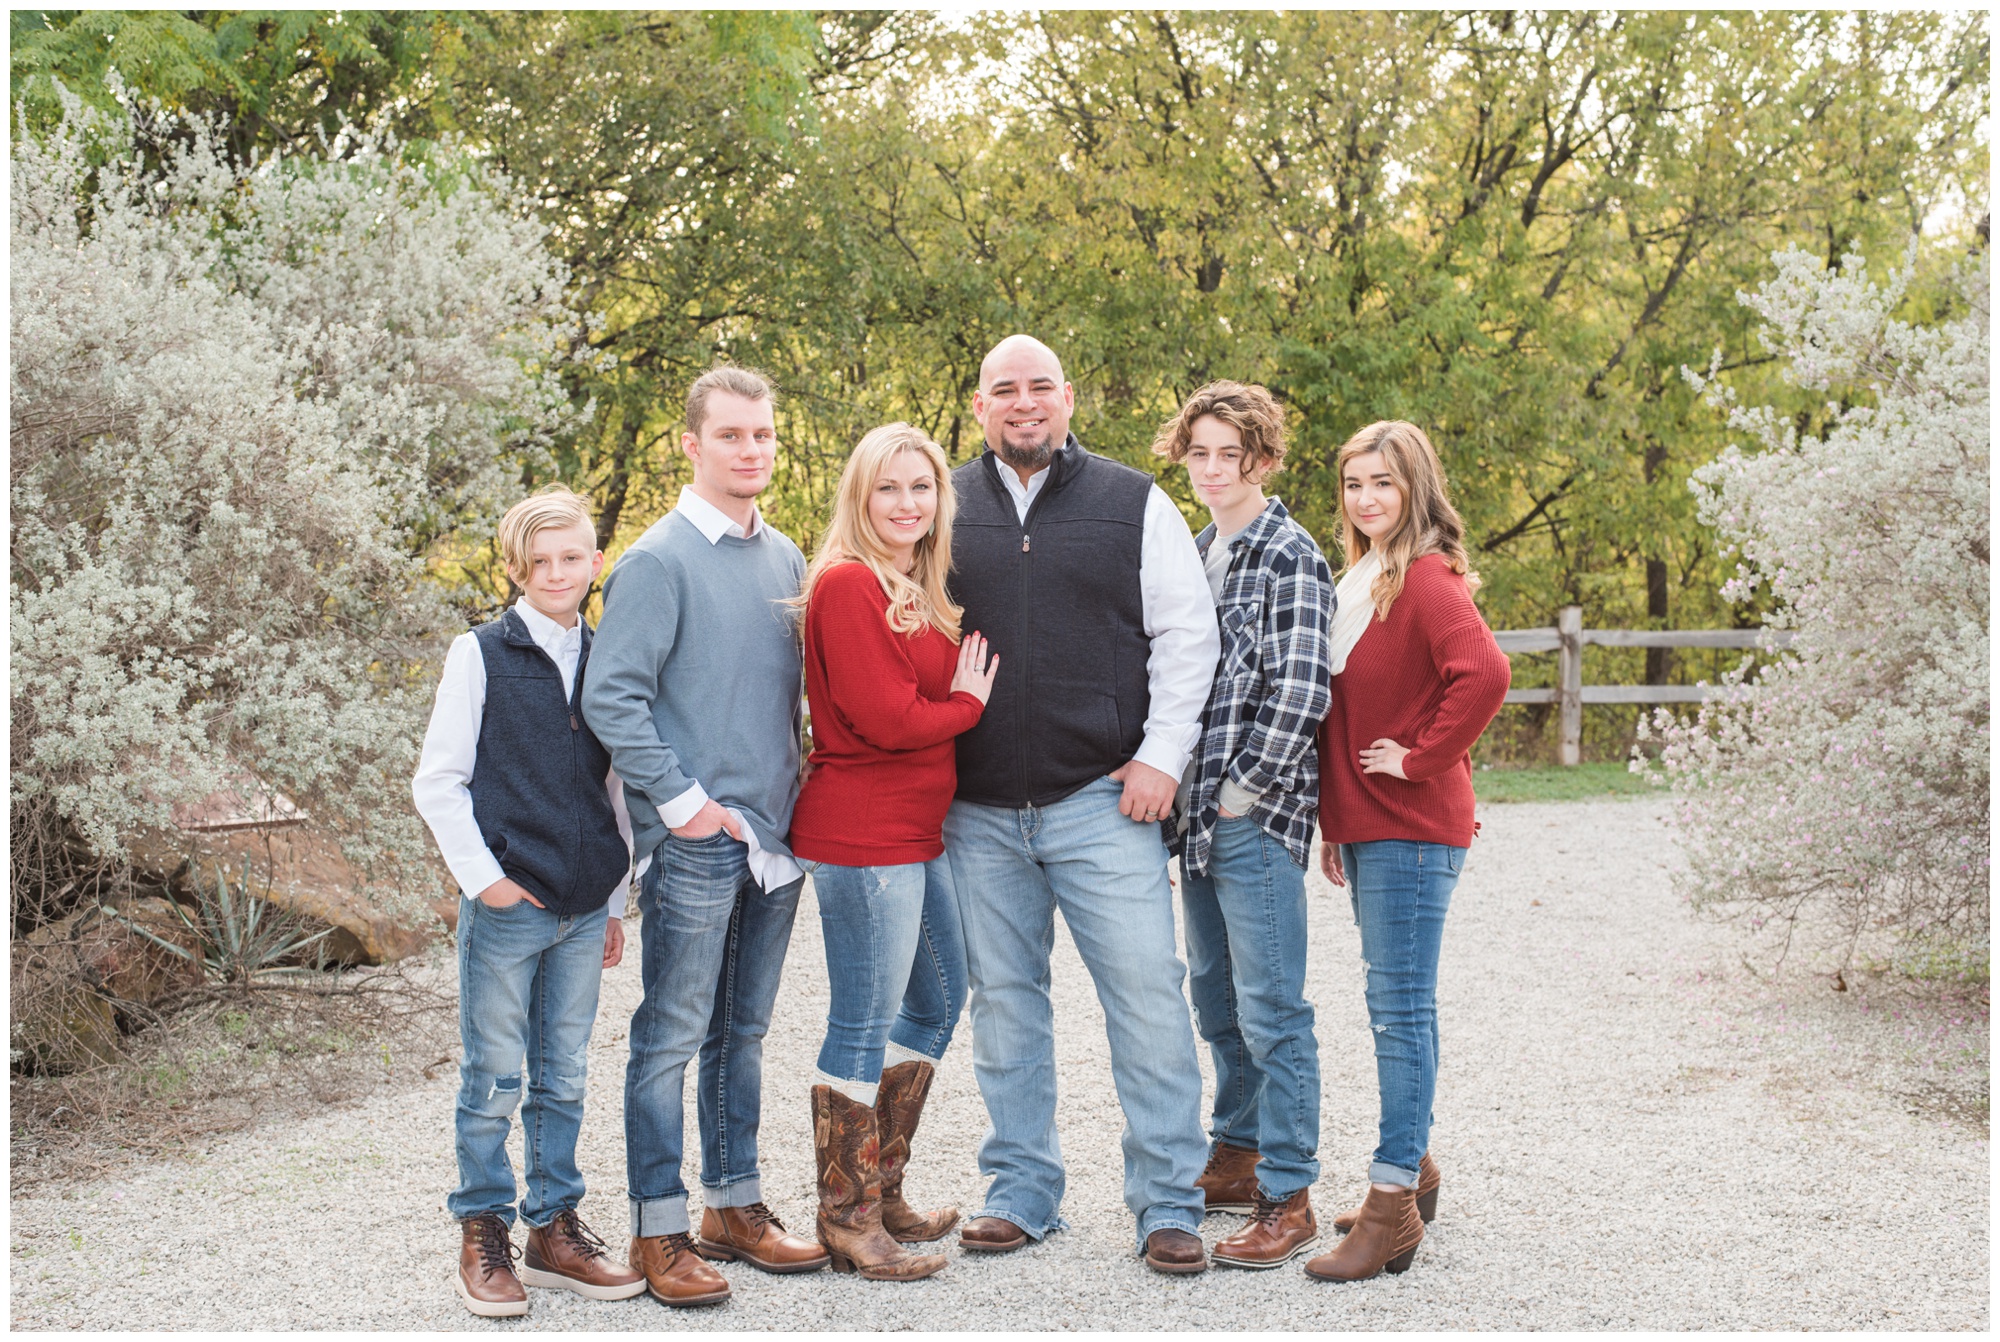 Fort Worth Stockyards | Fort Worth Stockyards Family Session | Lauren Grimes Photography | Fort Worth Family Photographer